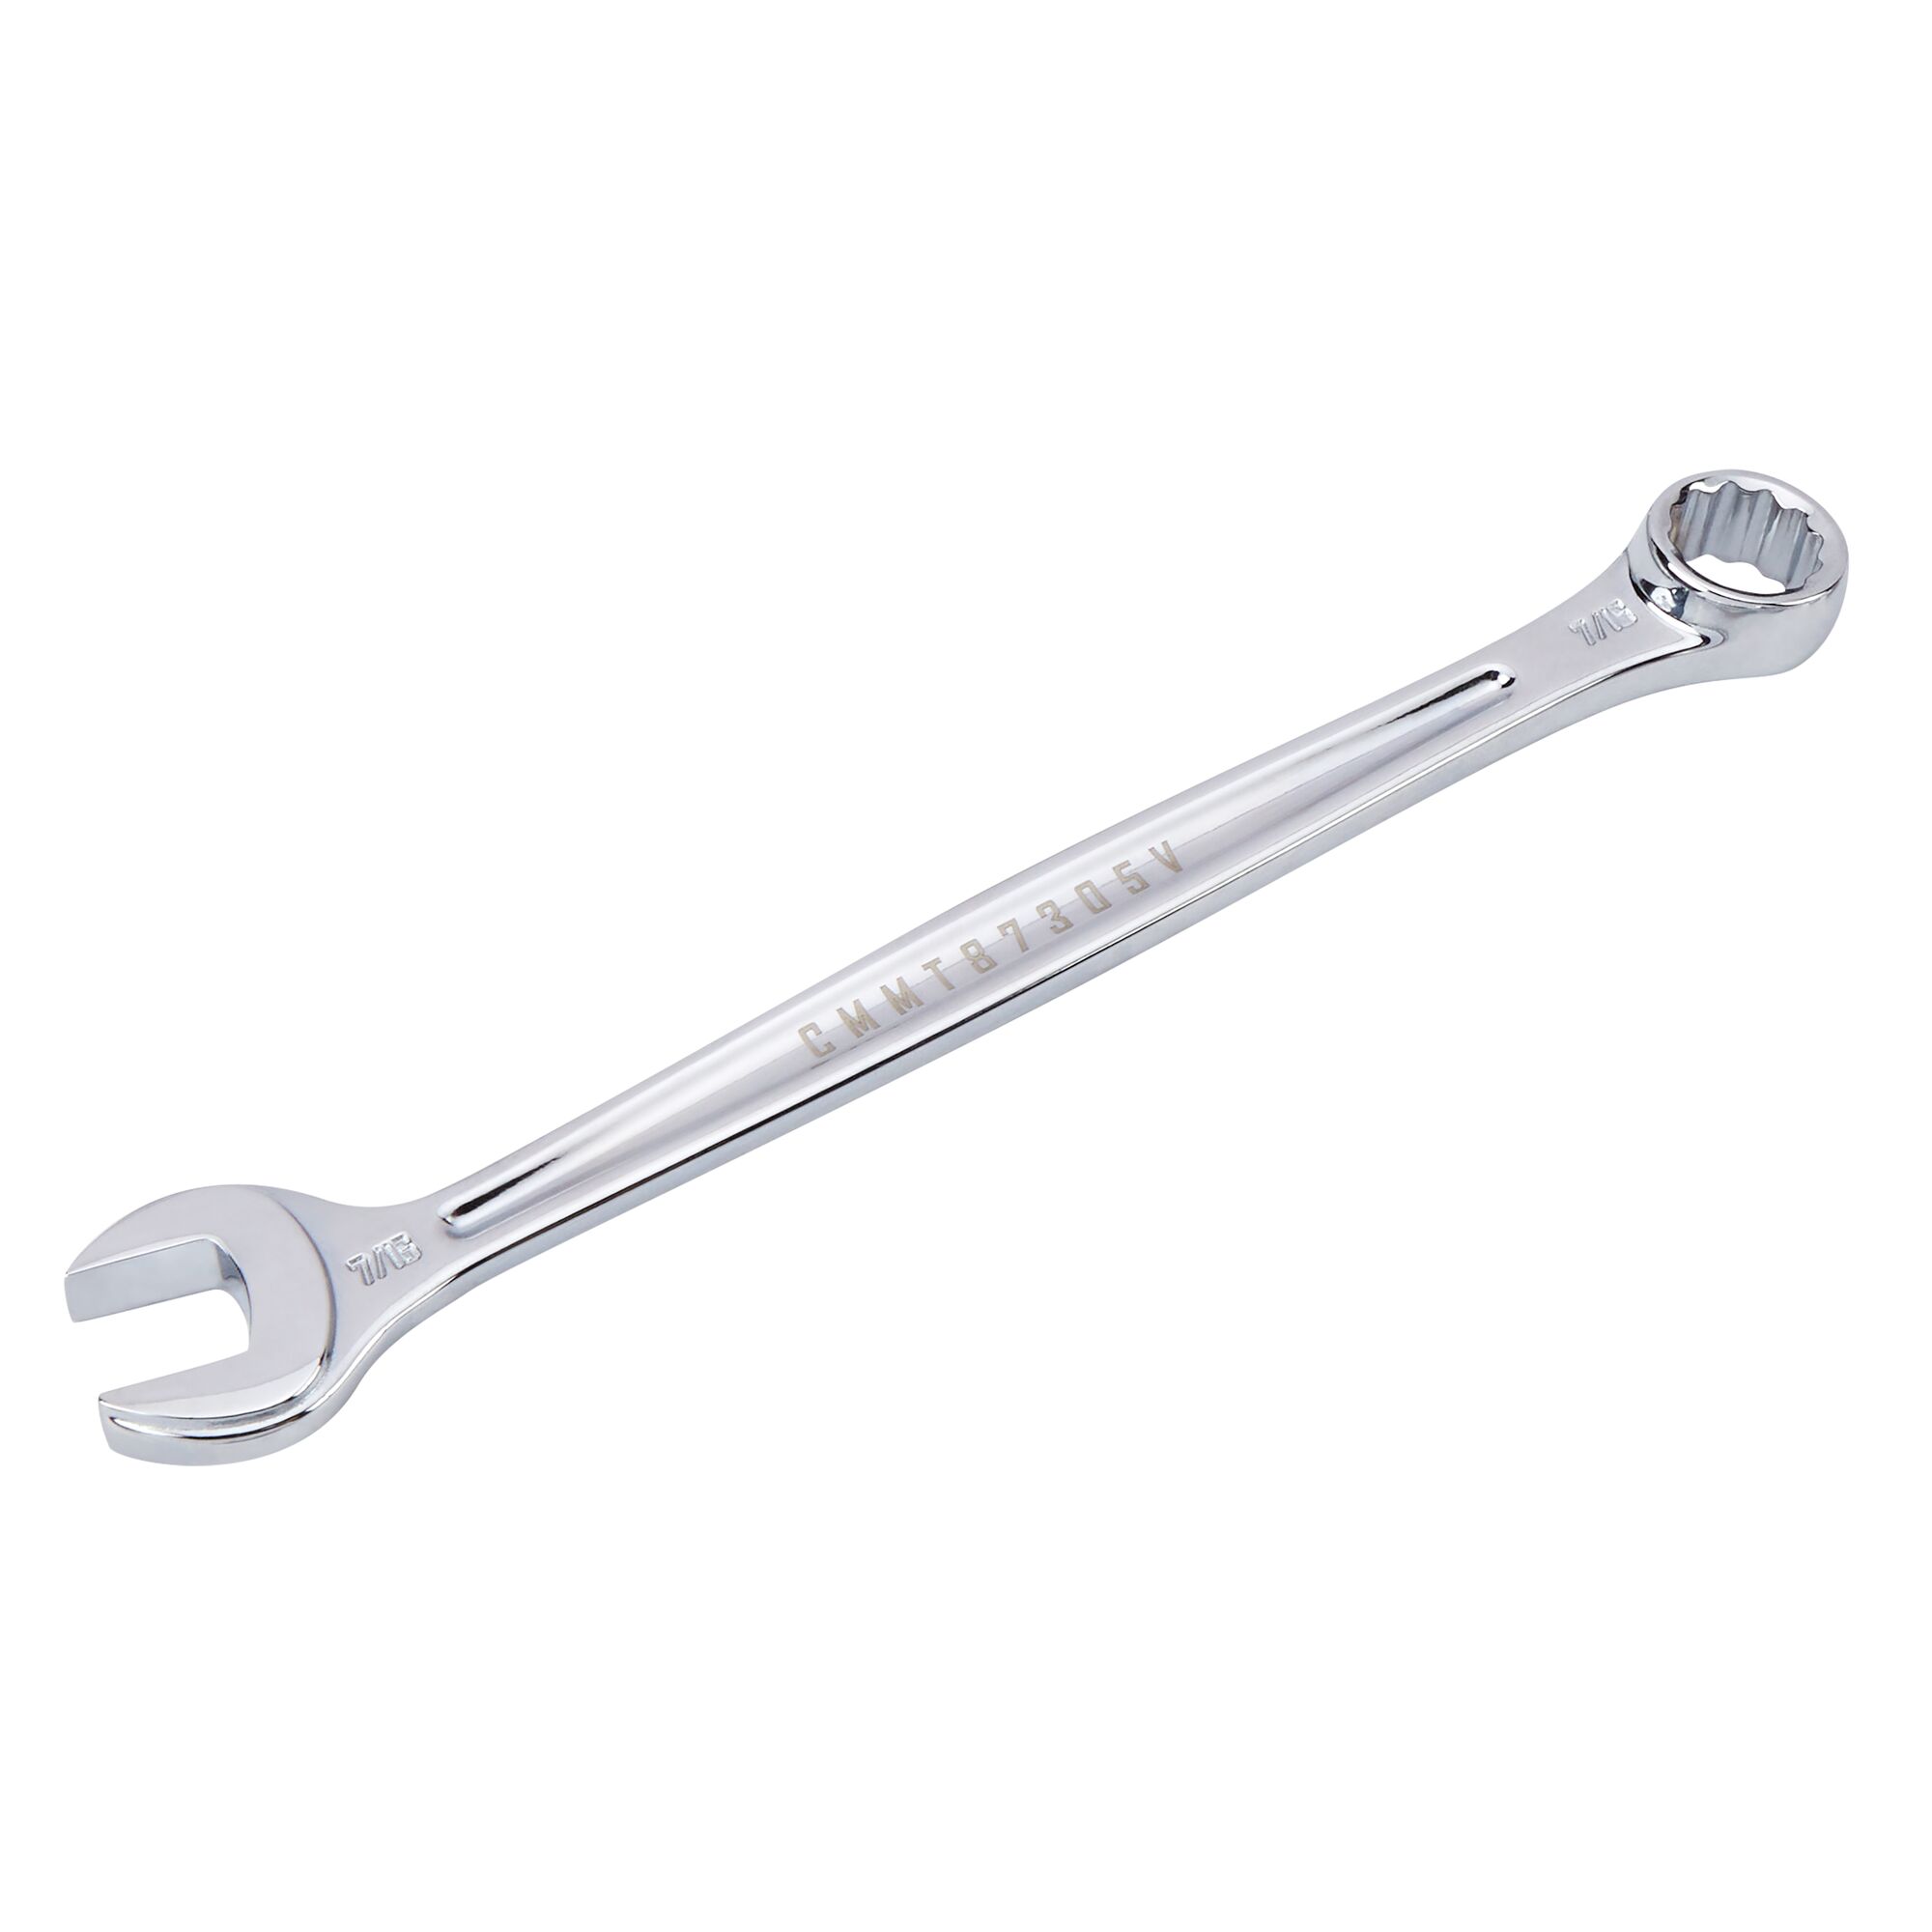 CRAFTSMAN V-SERIES Combo Wrench 7/16 